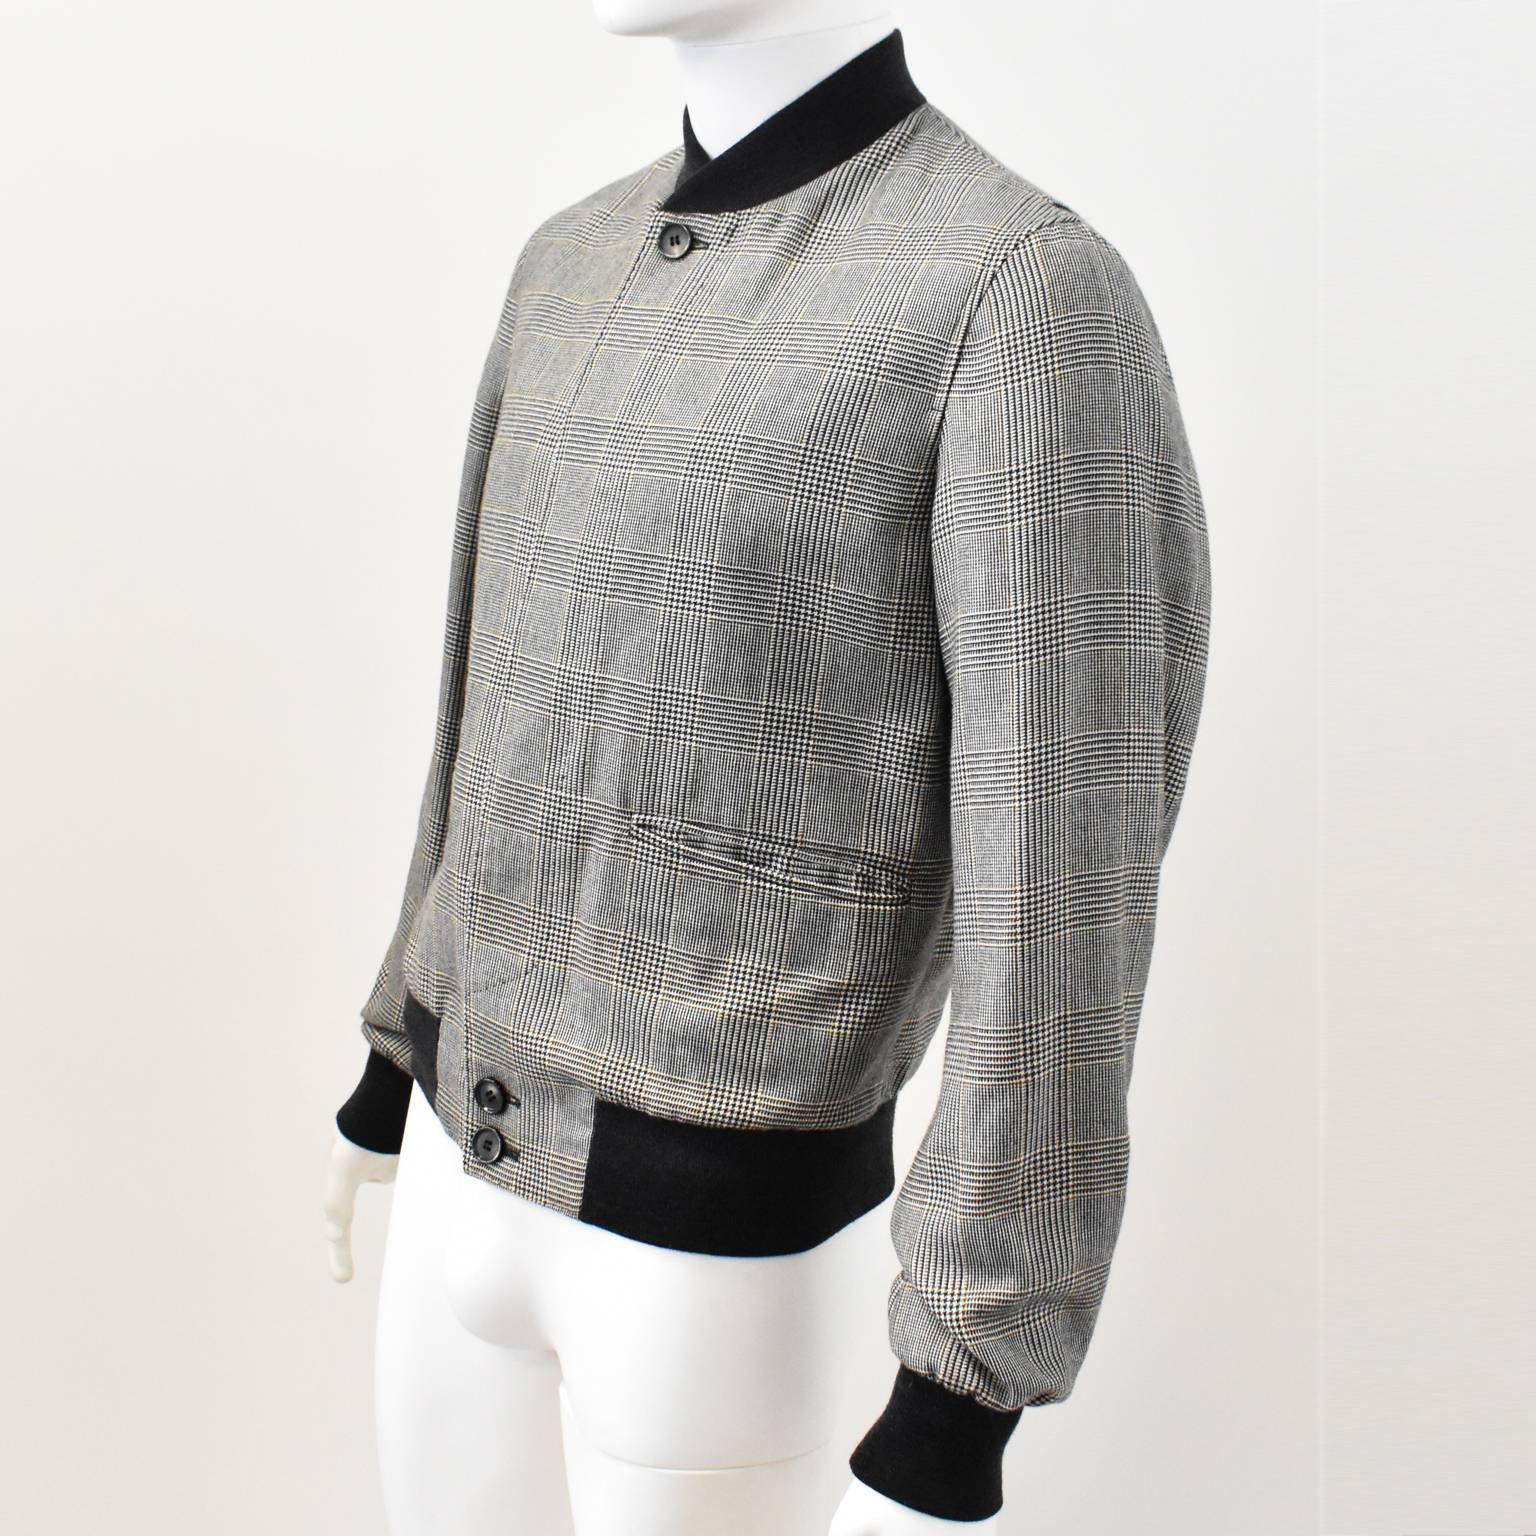 A luxurious cashmere bomber jacket from Alexander McQueen’s Autumn Winter 2014 menswear collection. 
The jacket is made of 100% cashmere that has been woven into a grey and black Prince of Wales check pattern. The jacket has a classic blouson/bomber